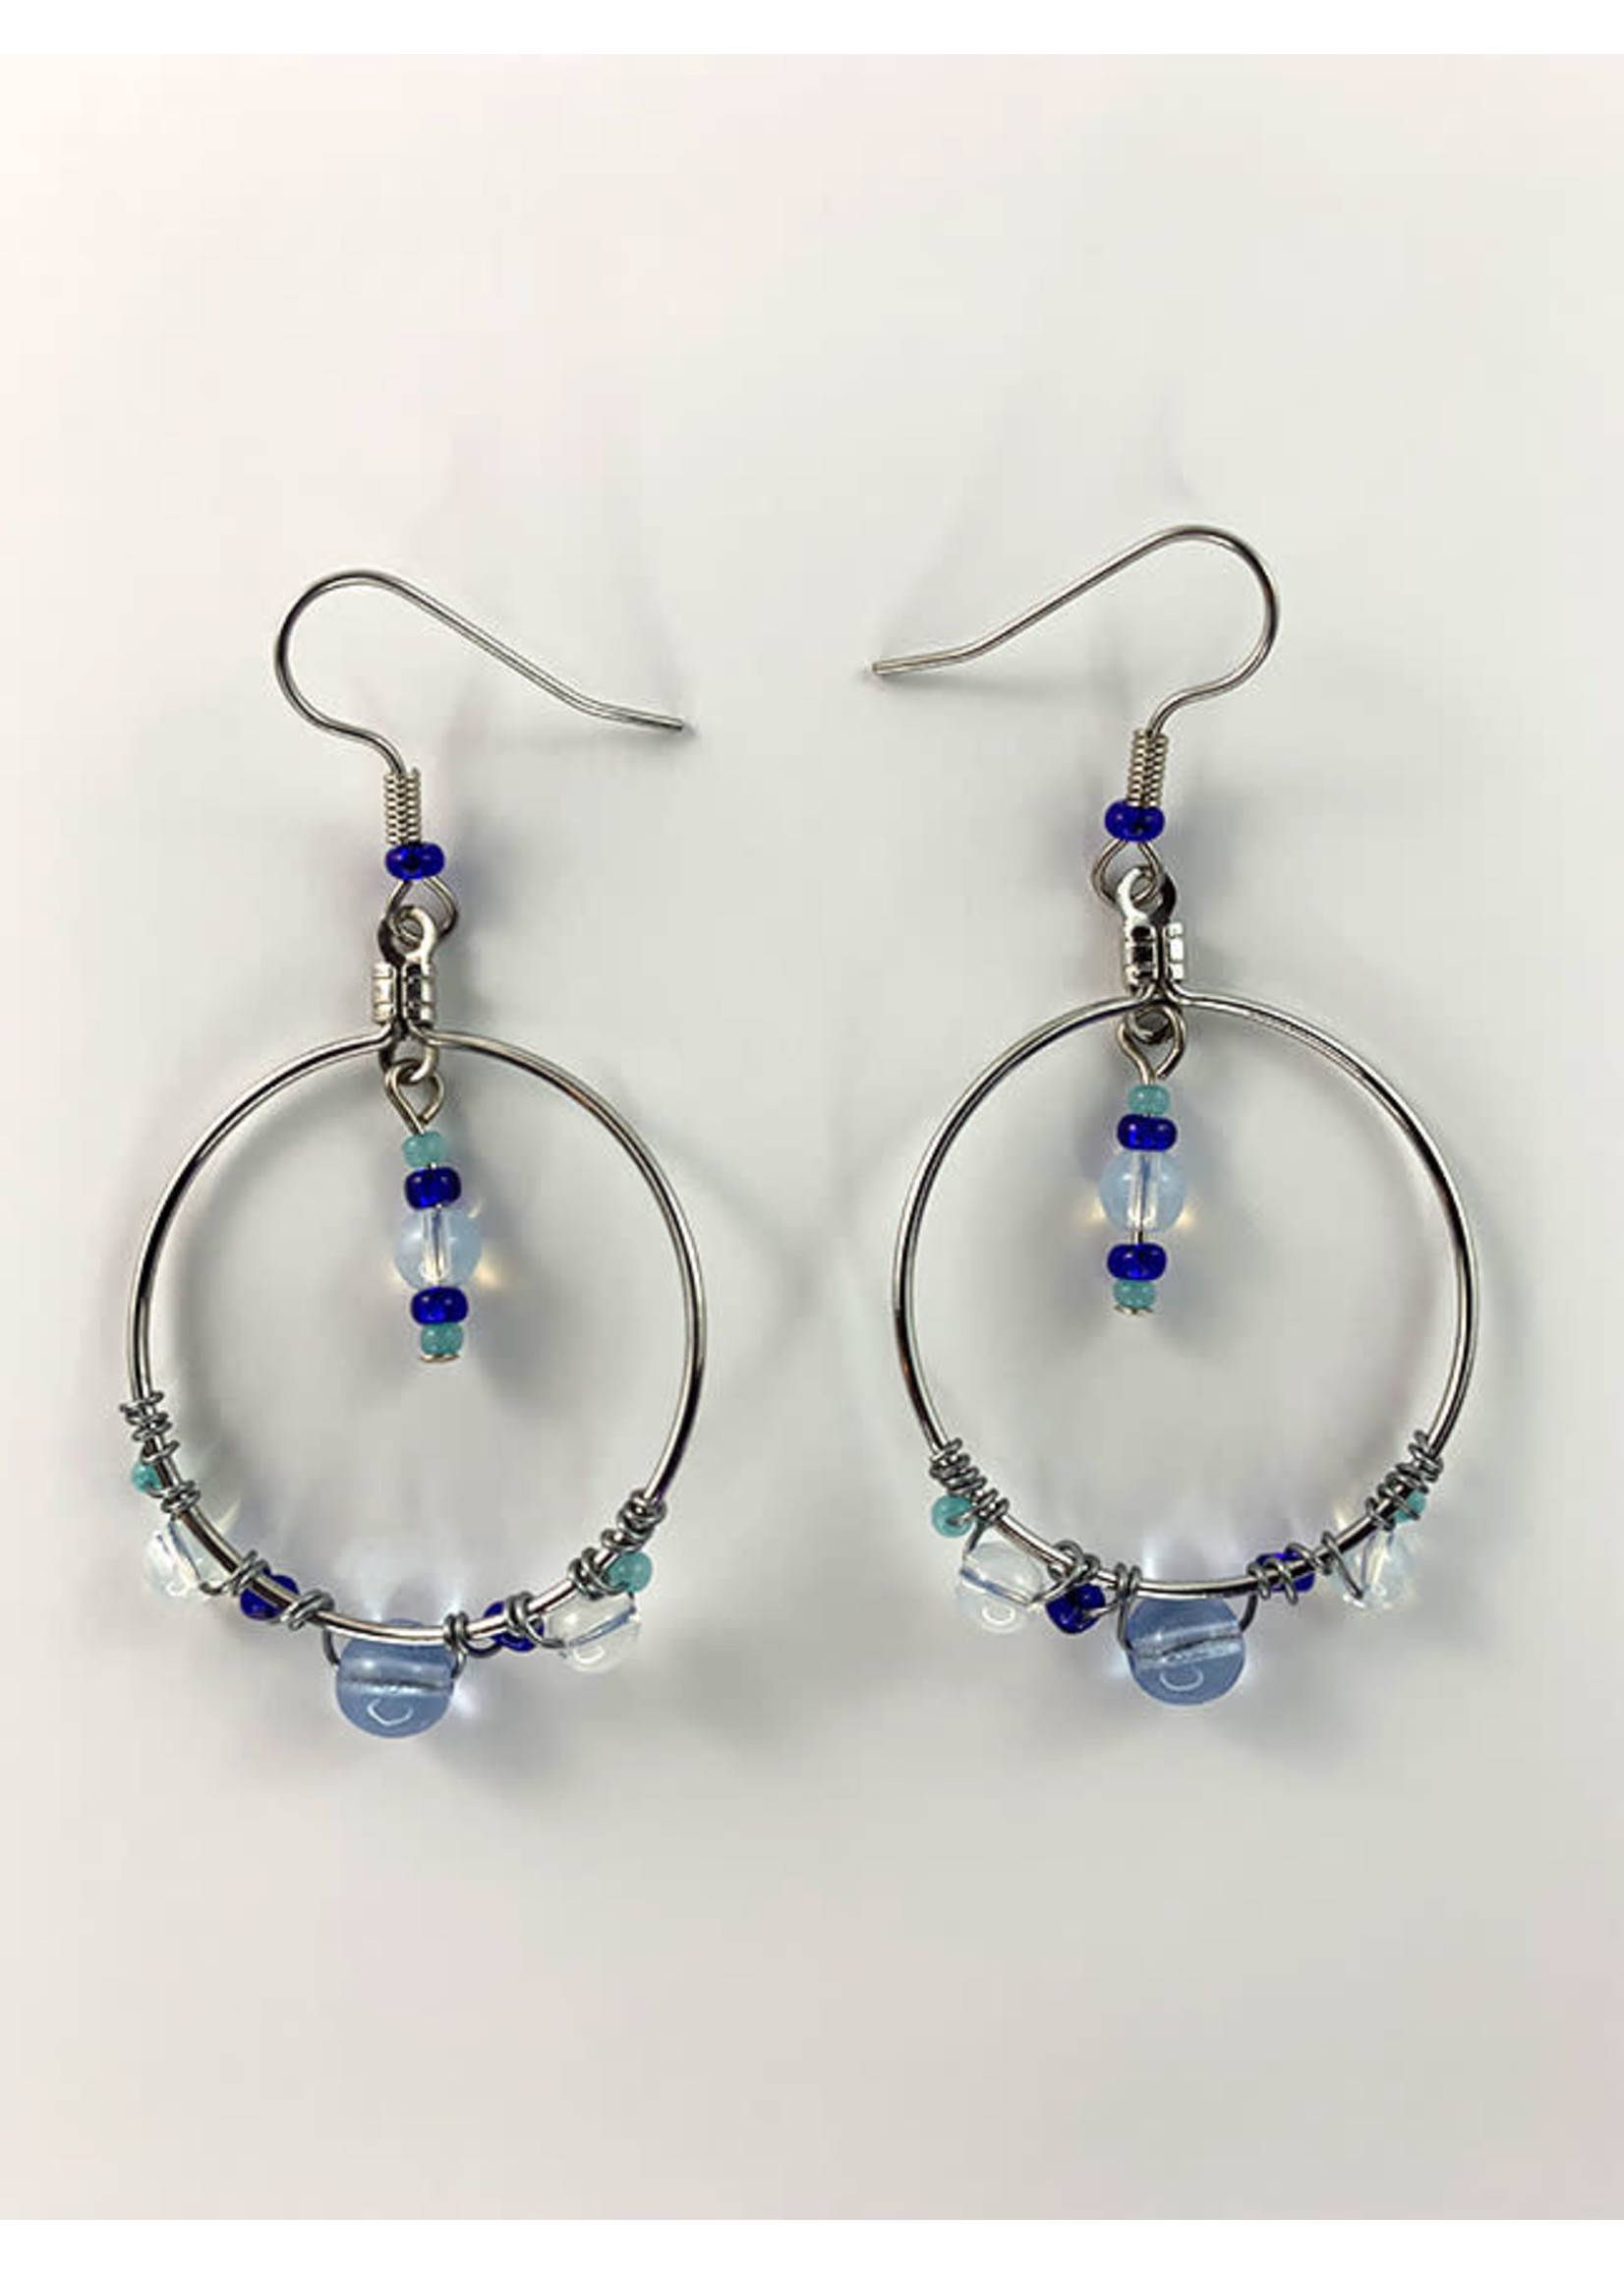 Circle of Eagles Beaded Earrings Hoops - Blue and White Beads (SOLD)